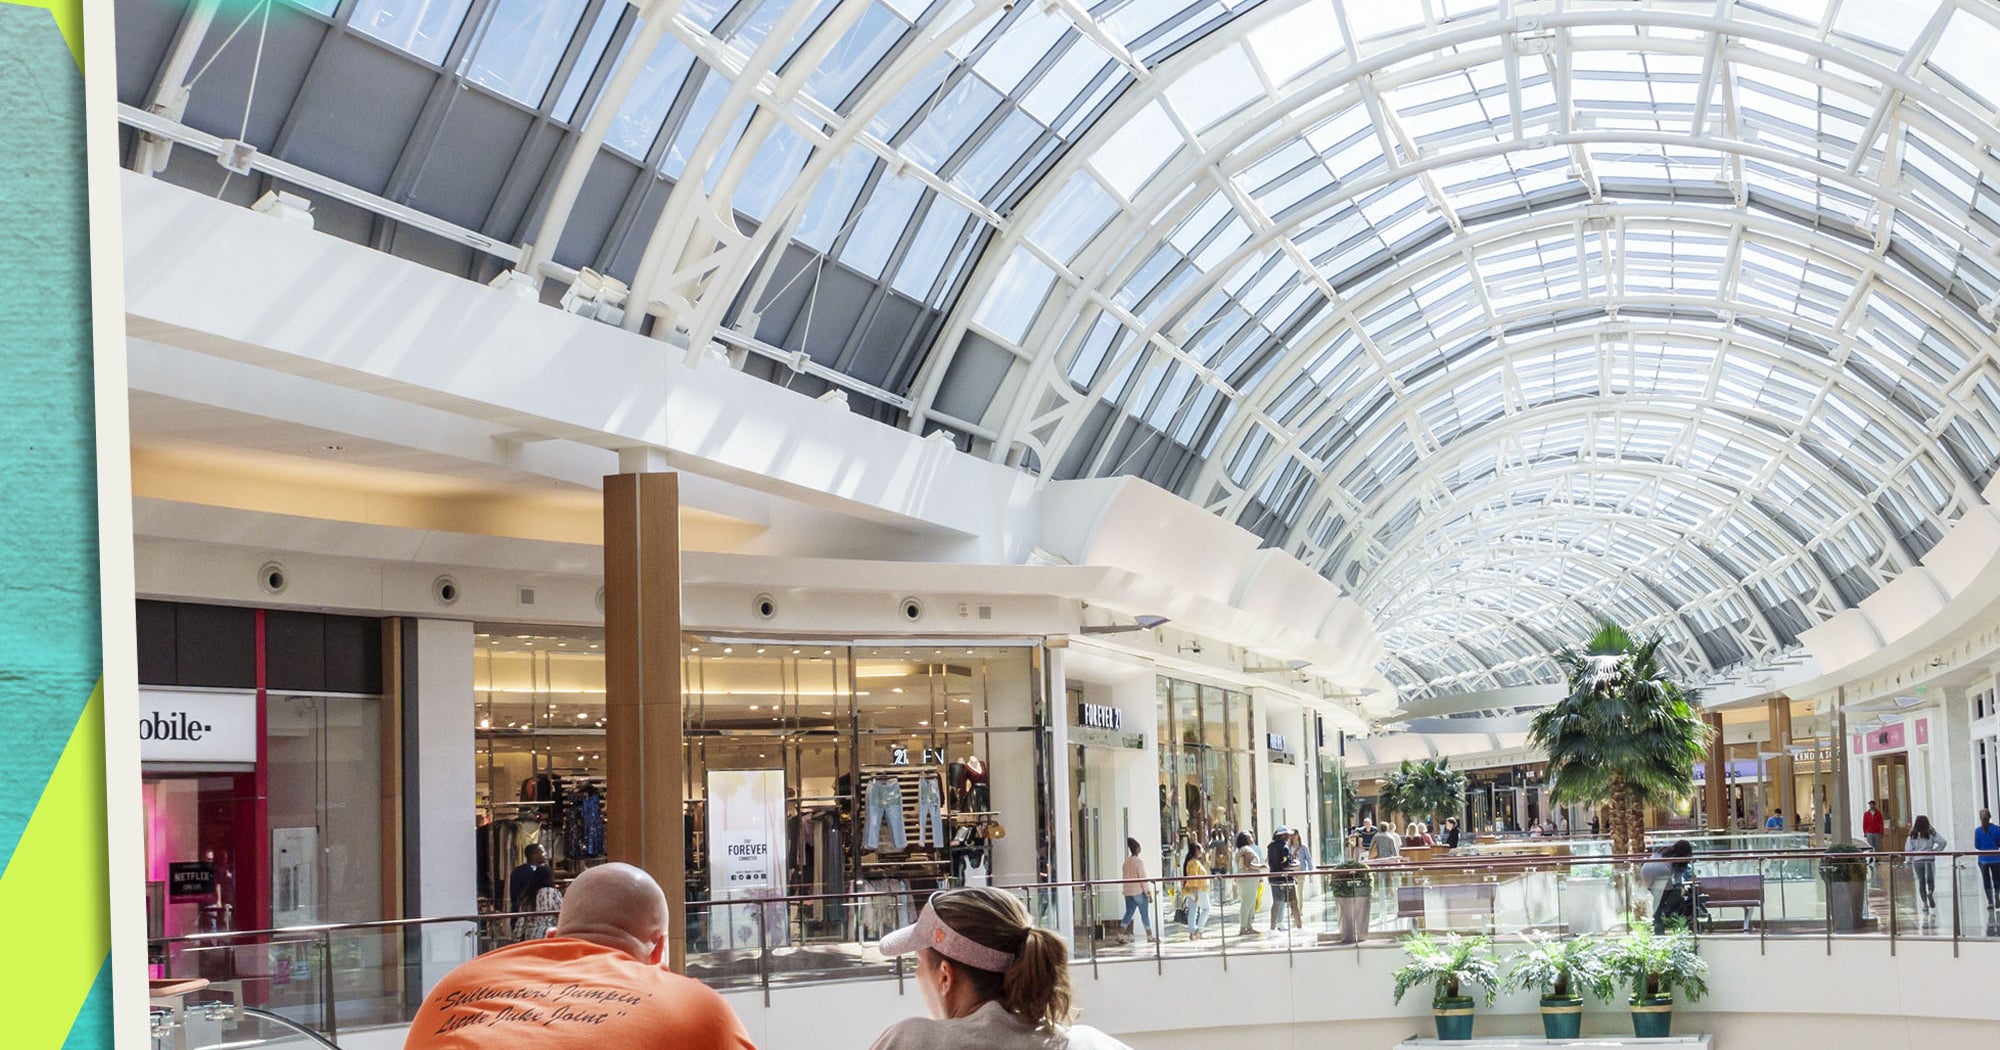 25% of U.S. malls are set to shut within 5 years. What comes next?